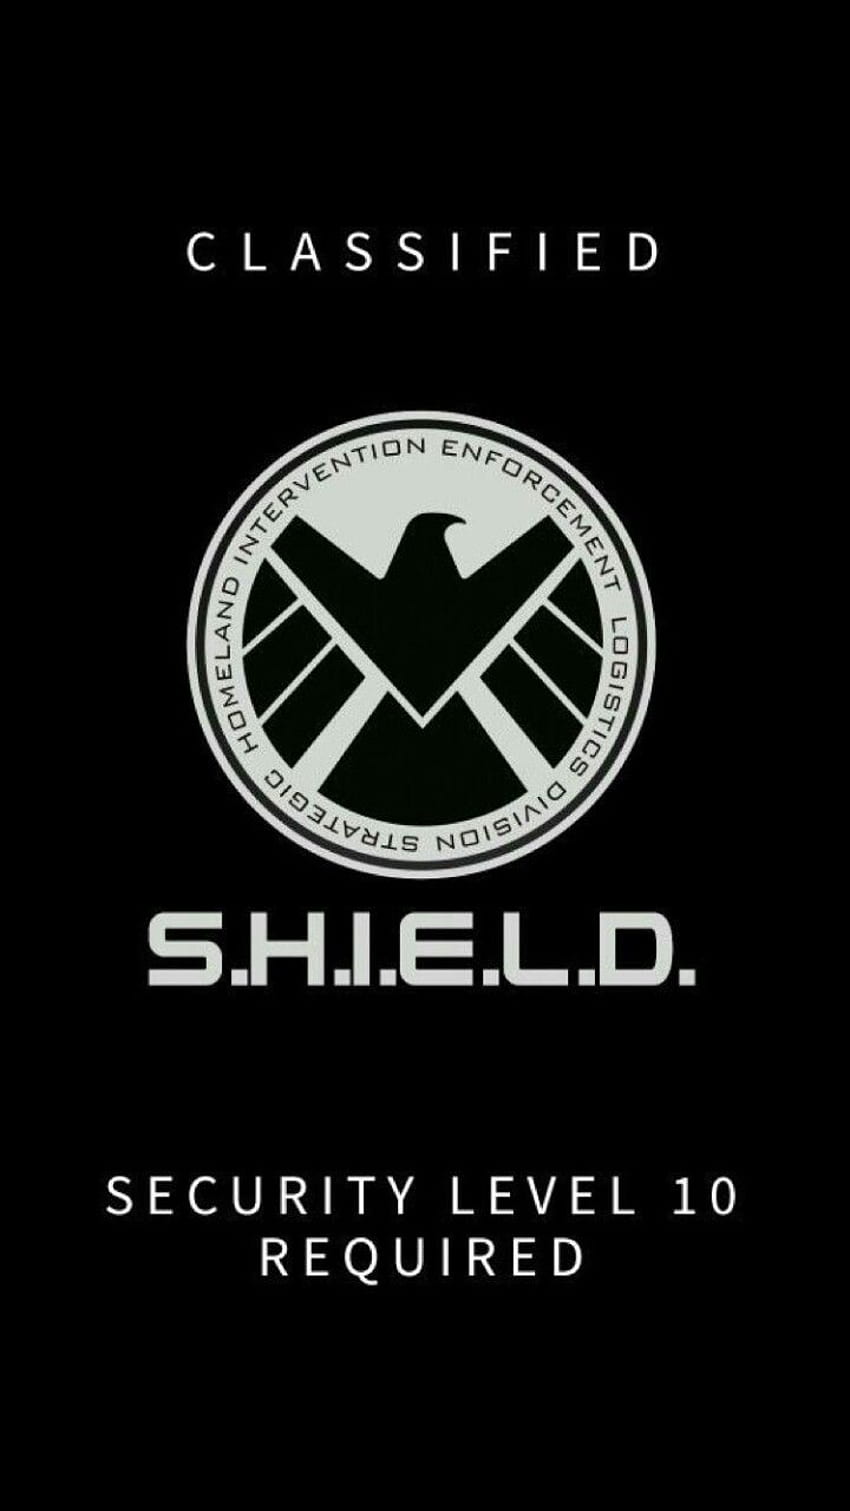 NEW The Shield Reunited wallpaper! - Kupy Wrestling Wallpapers